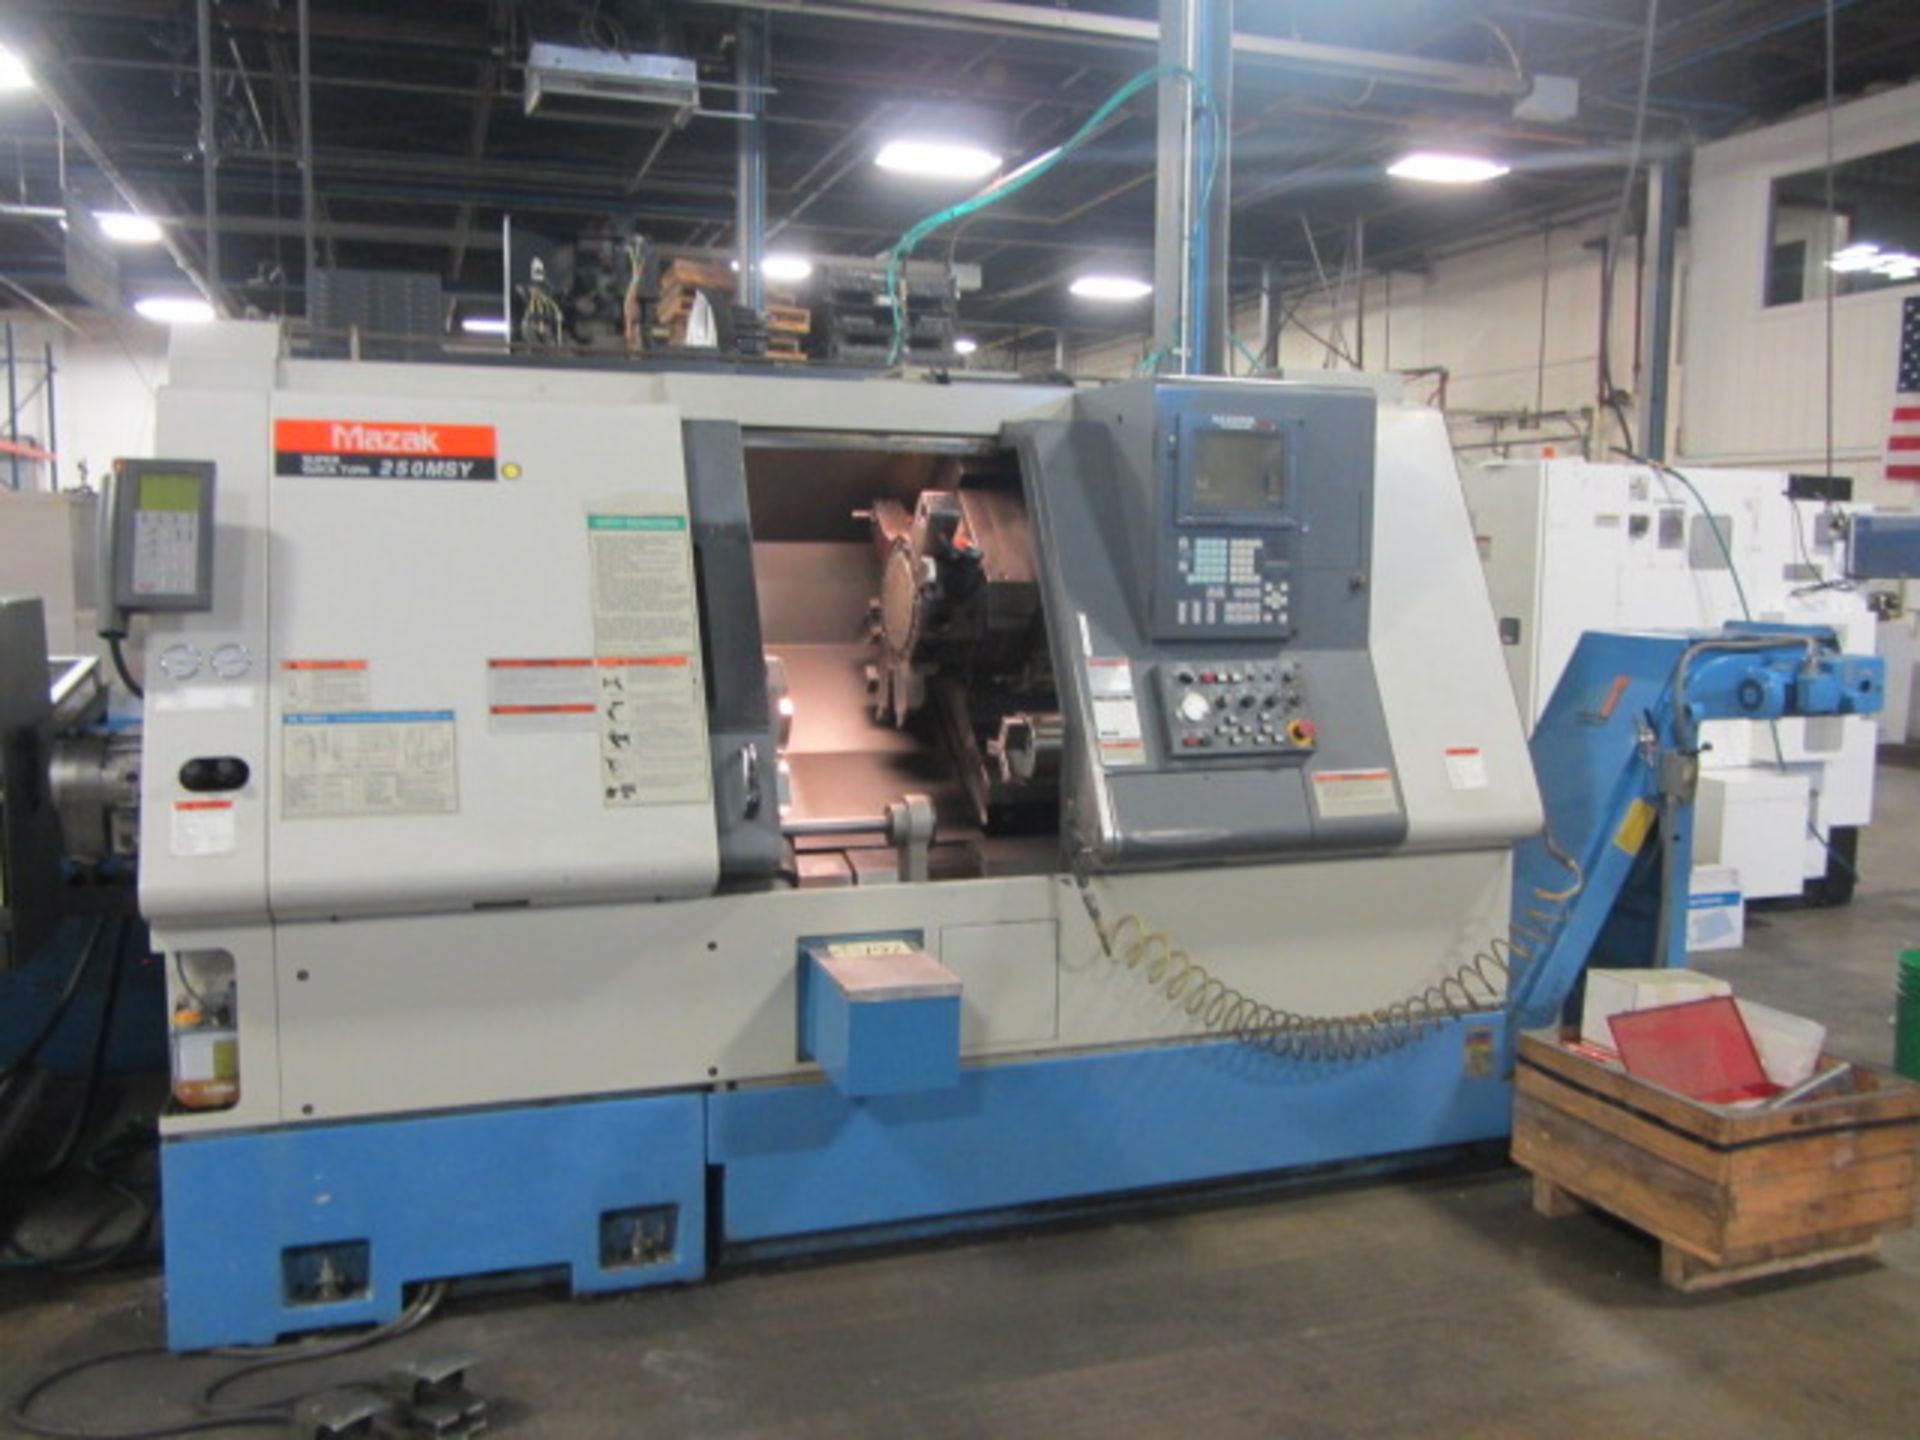 Mazak Super Quick Turn 250-MSY CNC Turning Center with Sub-Spindle, Milling & Y-Axis, 12 Position